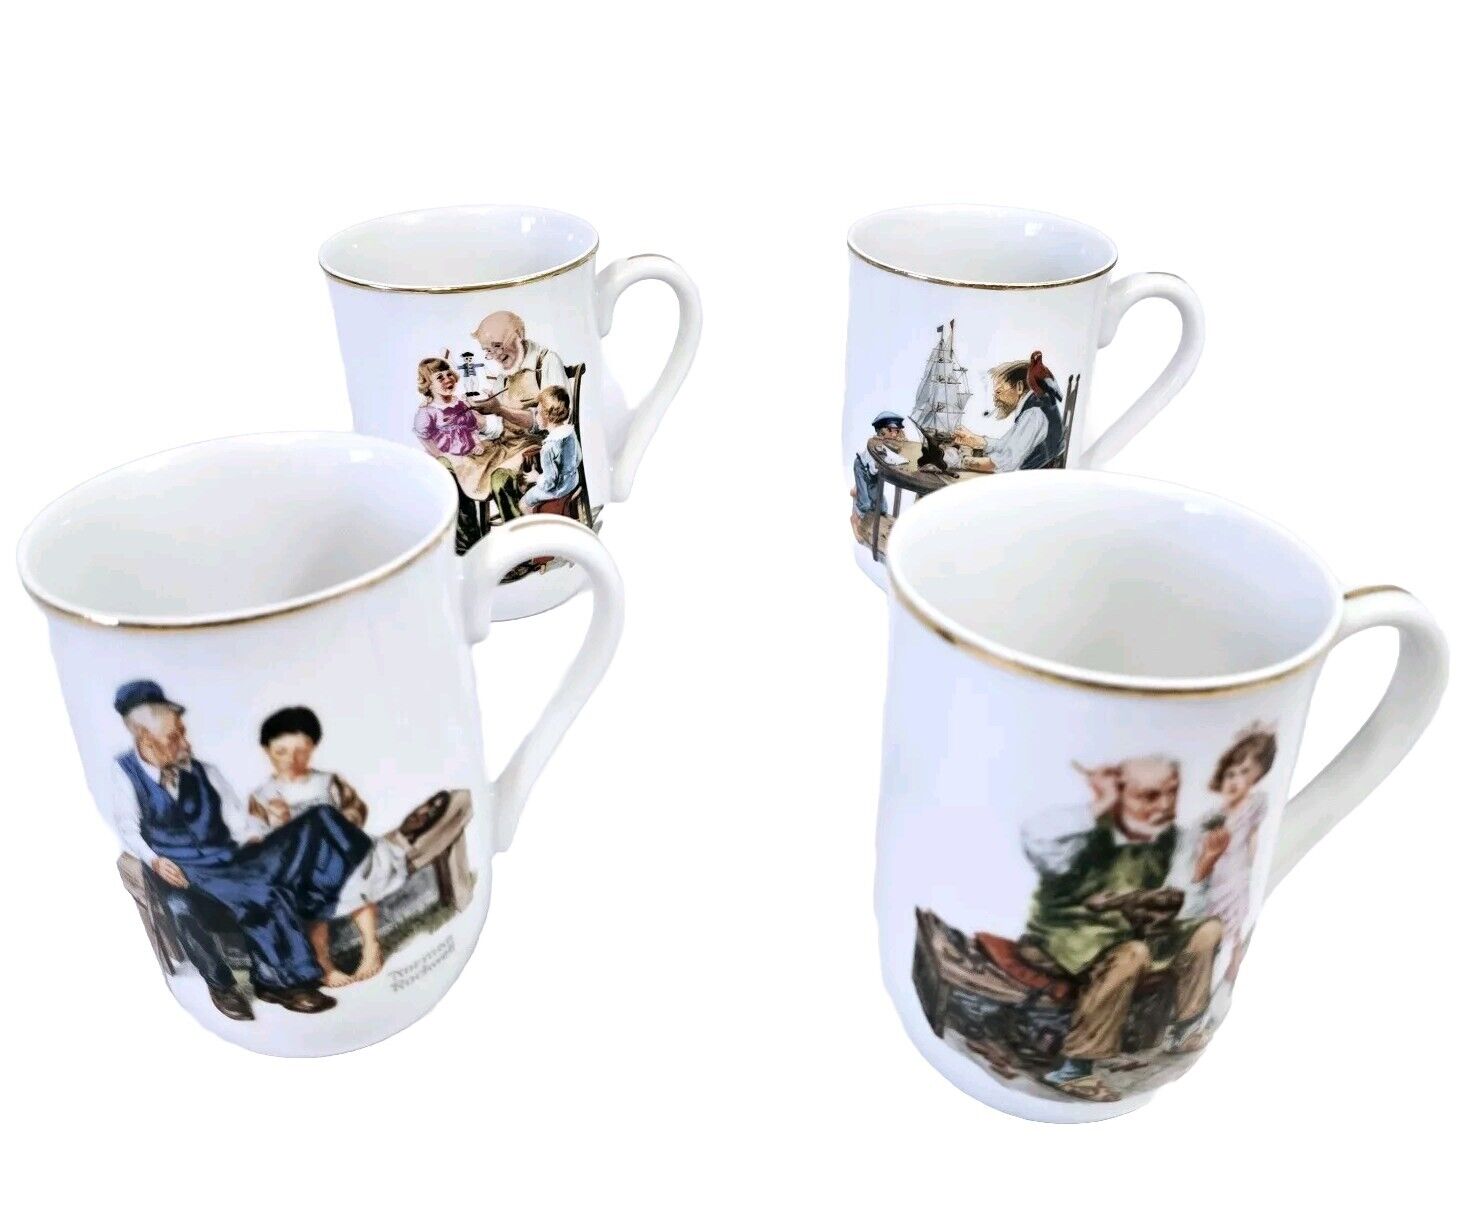 1982 Norman Rockwell Museum Coffee Mugs Cups White/Gold Trim Set of 4. New